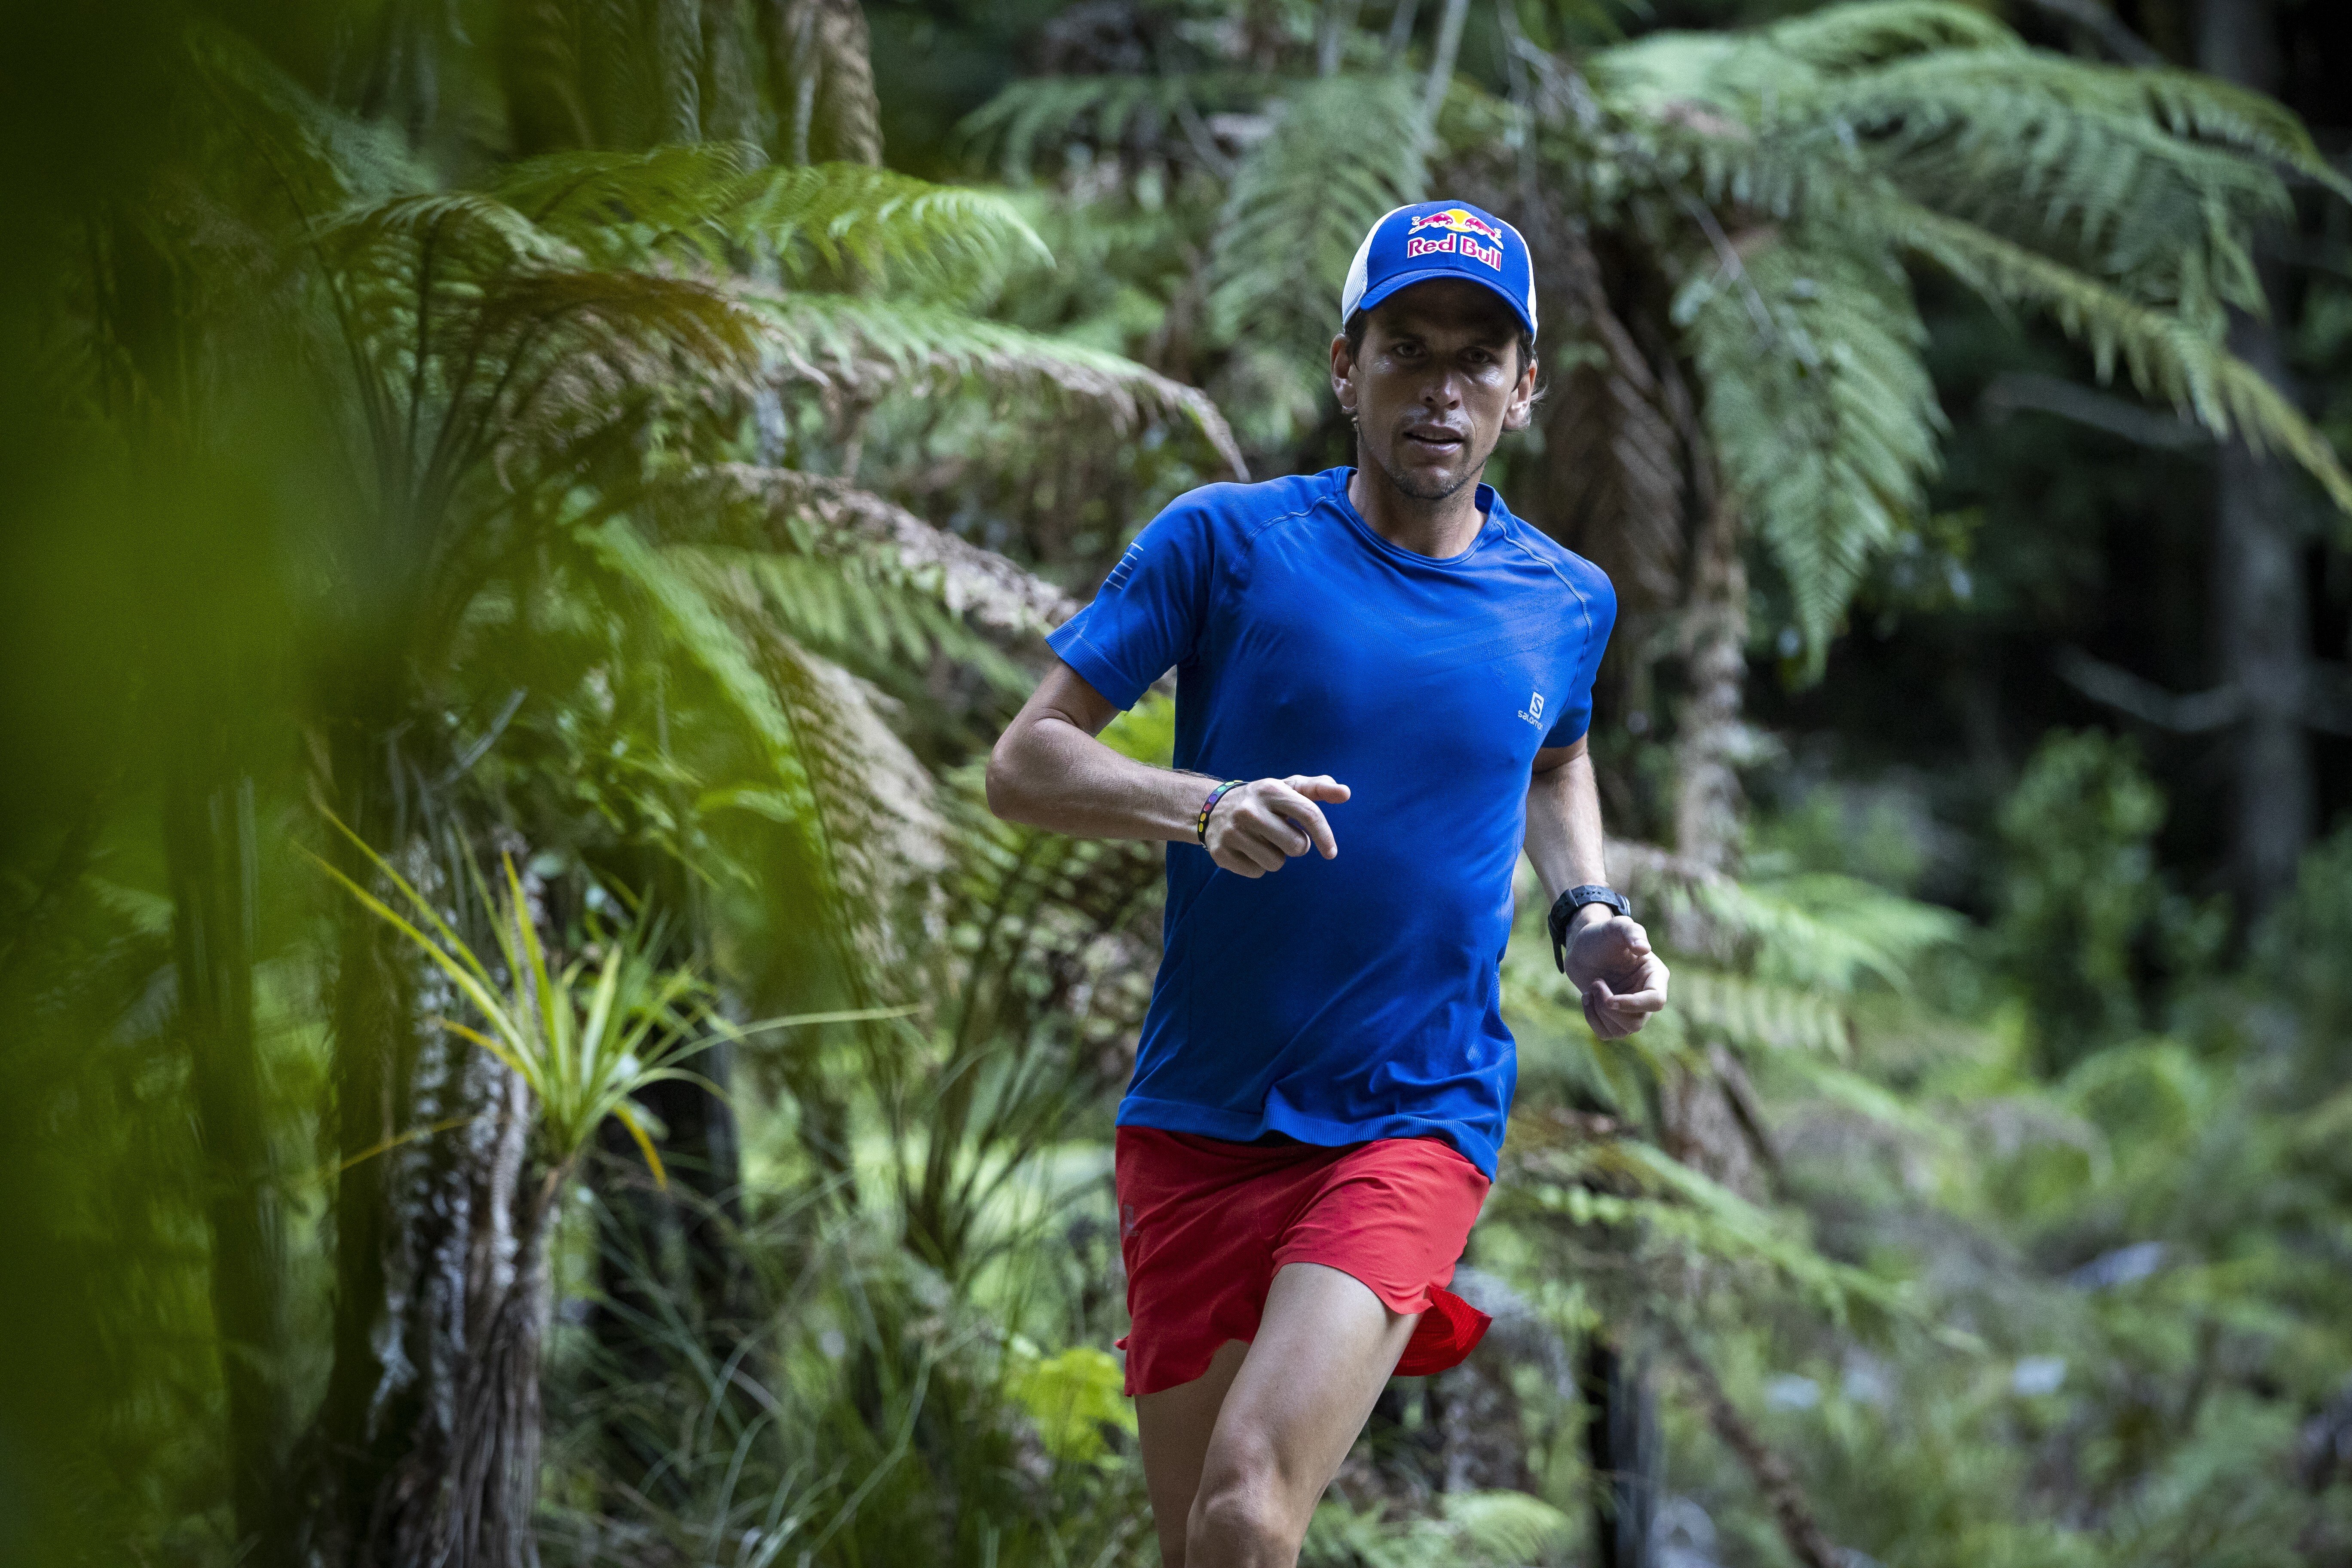 Ryan Sandes loves long days in the mountains as much as specific races. Photo: Graeme Murray/Red Bull